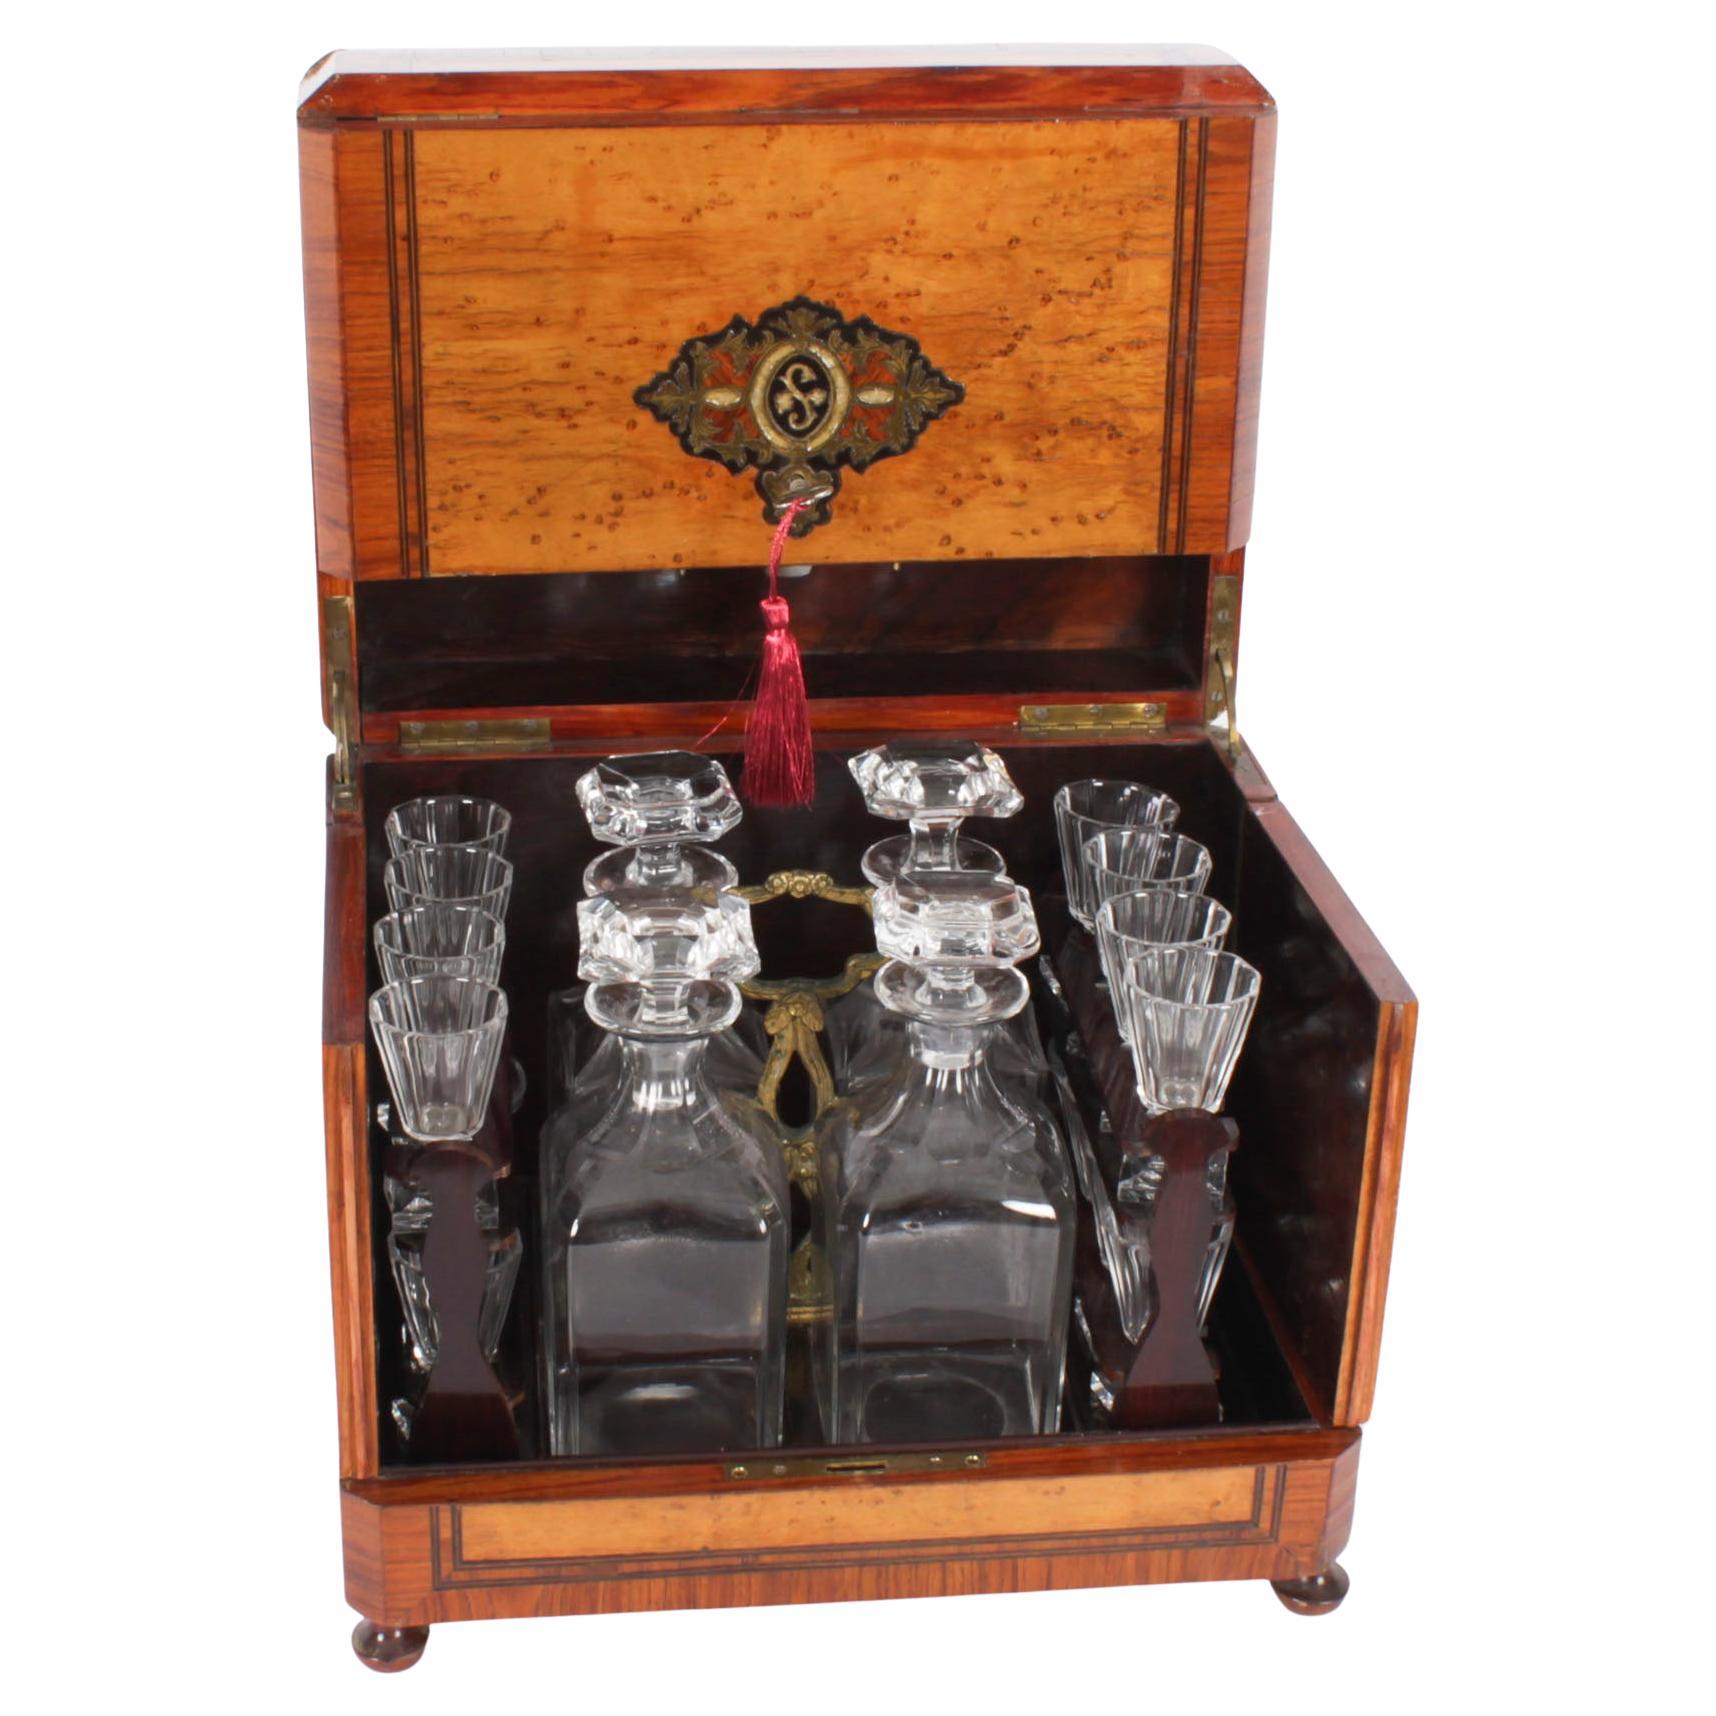 https://a.1stdibscdn.com/antique-french-napoleon-iii-tantalus-cave-a-liqueur-19th-century-for-sale/f_9506/f_376183421702895611310/f_37618342_1702895611863_bg_processed.jpg